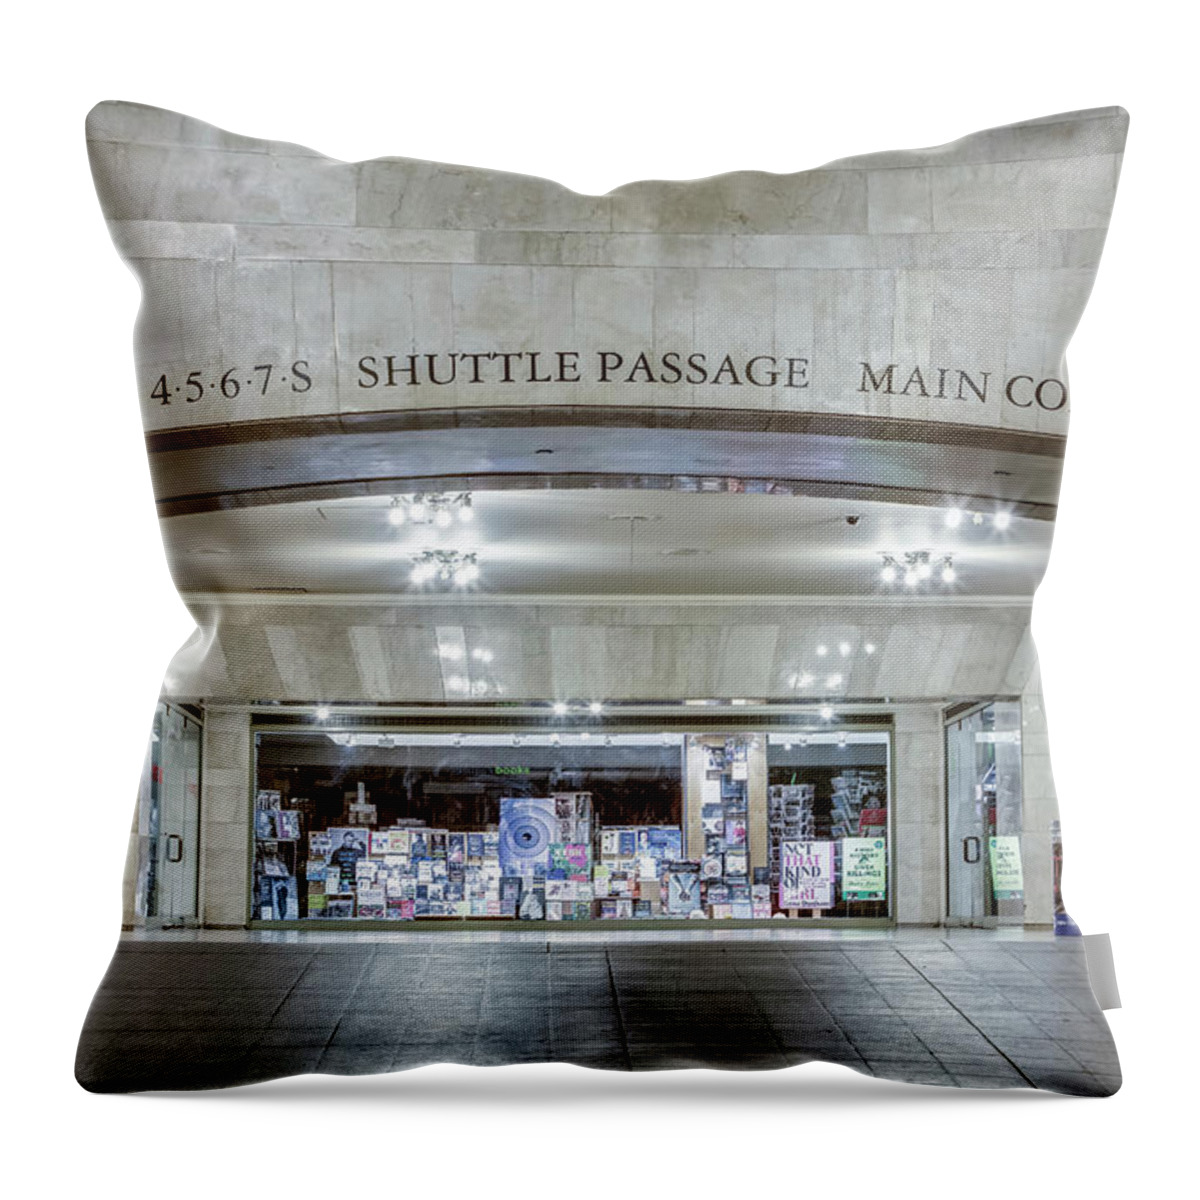 Grand Central Terminal Throw Pillow featuring the photograph Grand Central Shuttle Passage by Susan Candelario